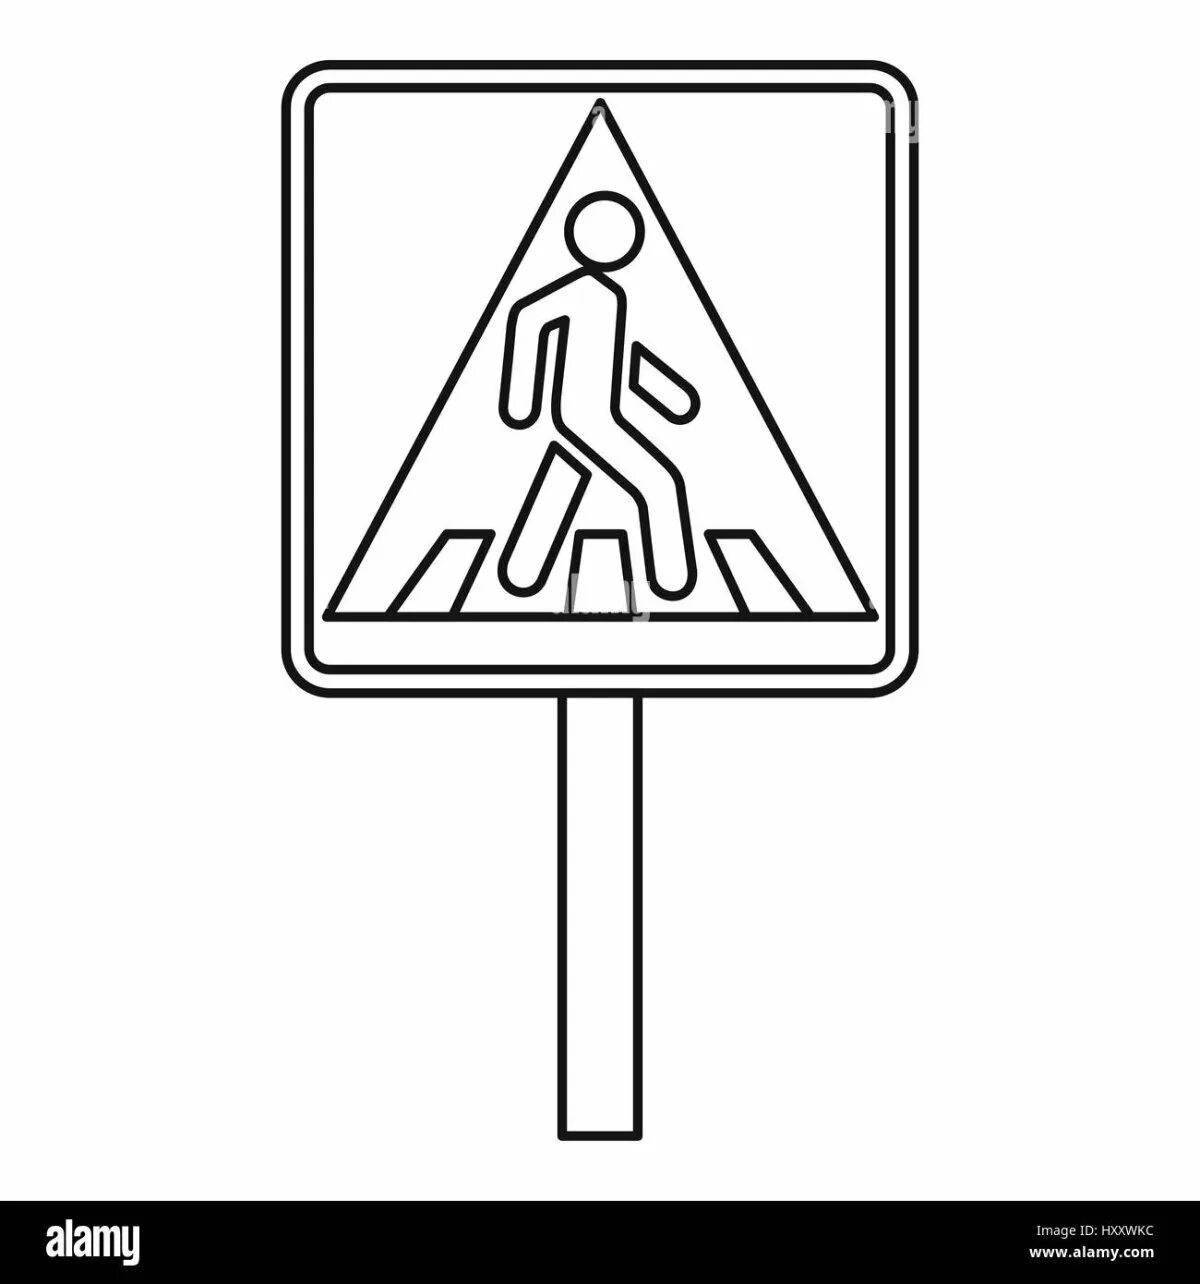 Coloring book traffic light sign